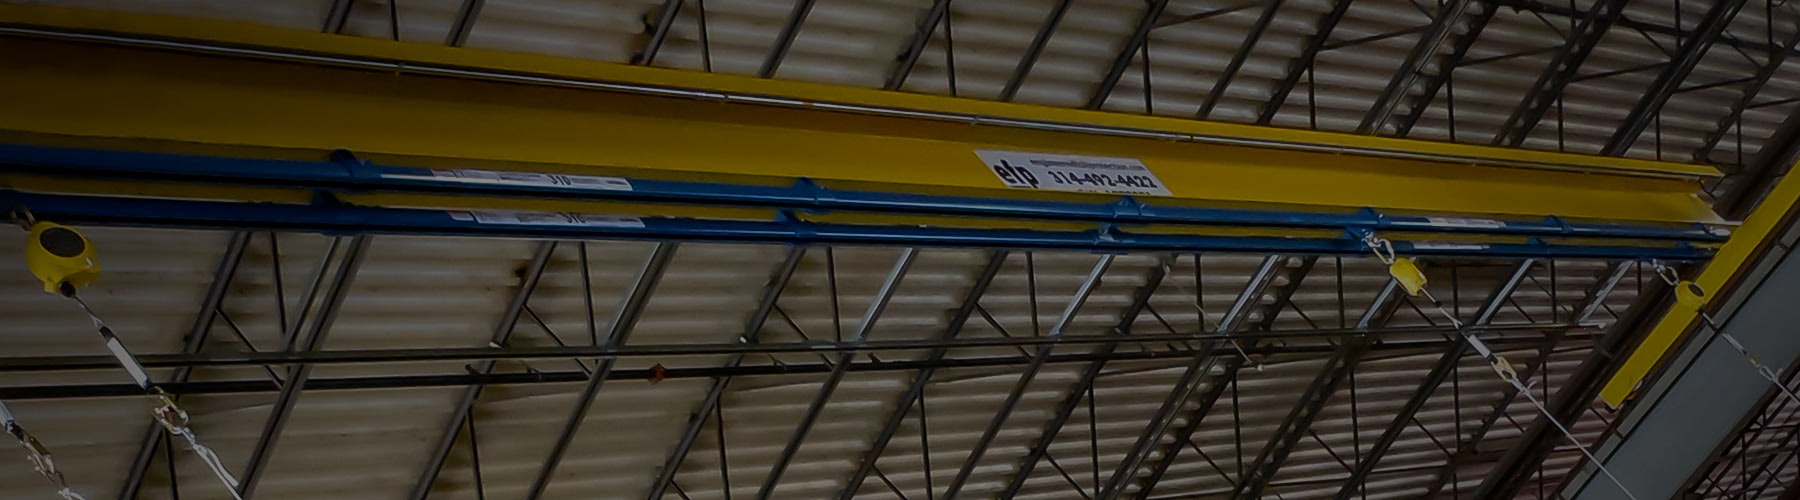 Transport Trailer Overhead Crane Fall Protection System